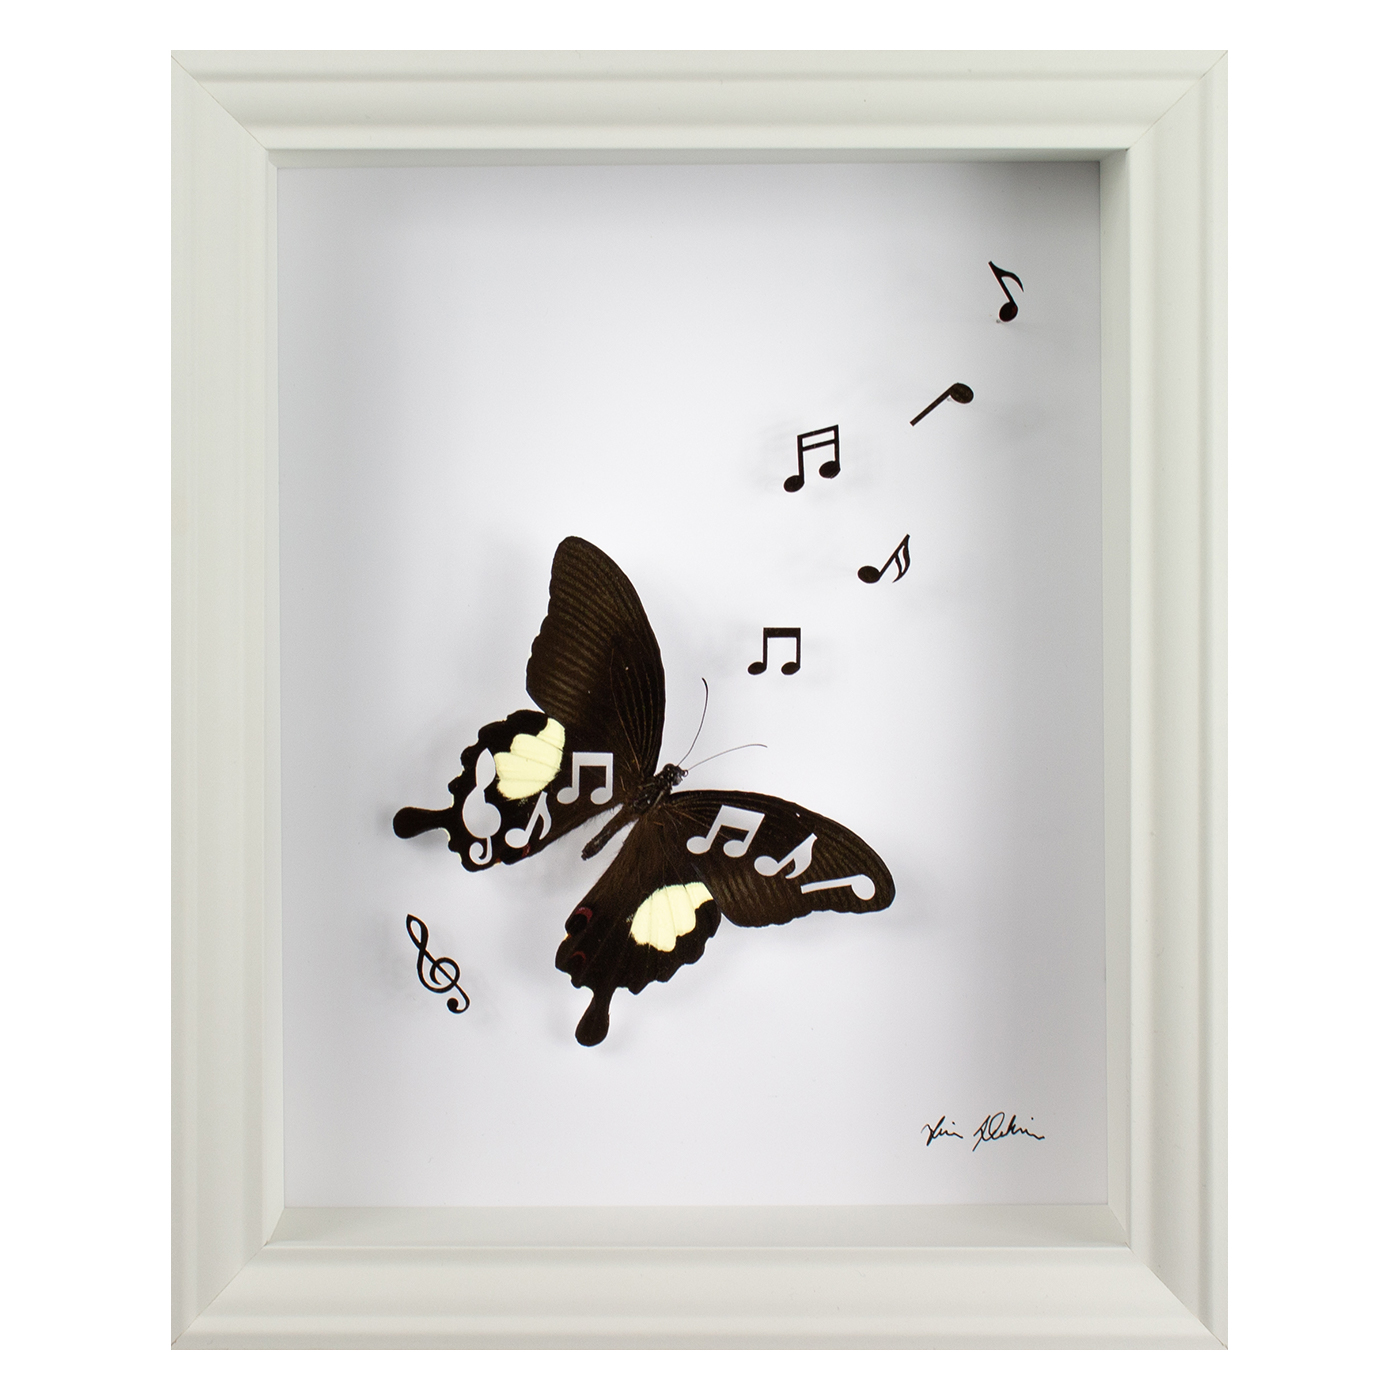 Vanitas 2 is a taxidermy artwork featuring a black butterfly with music note design